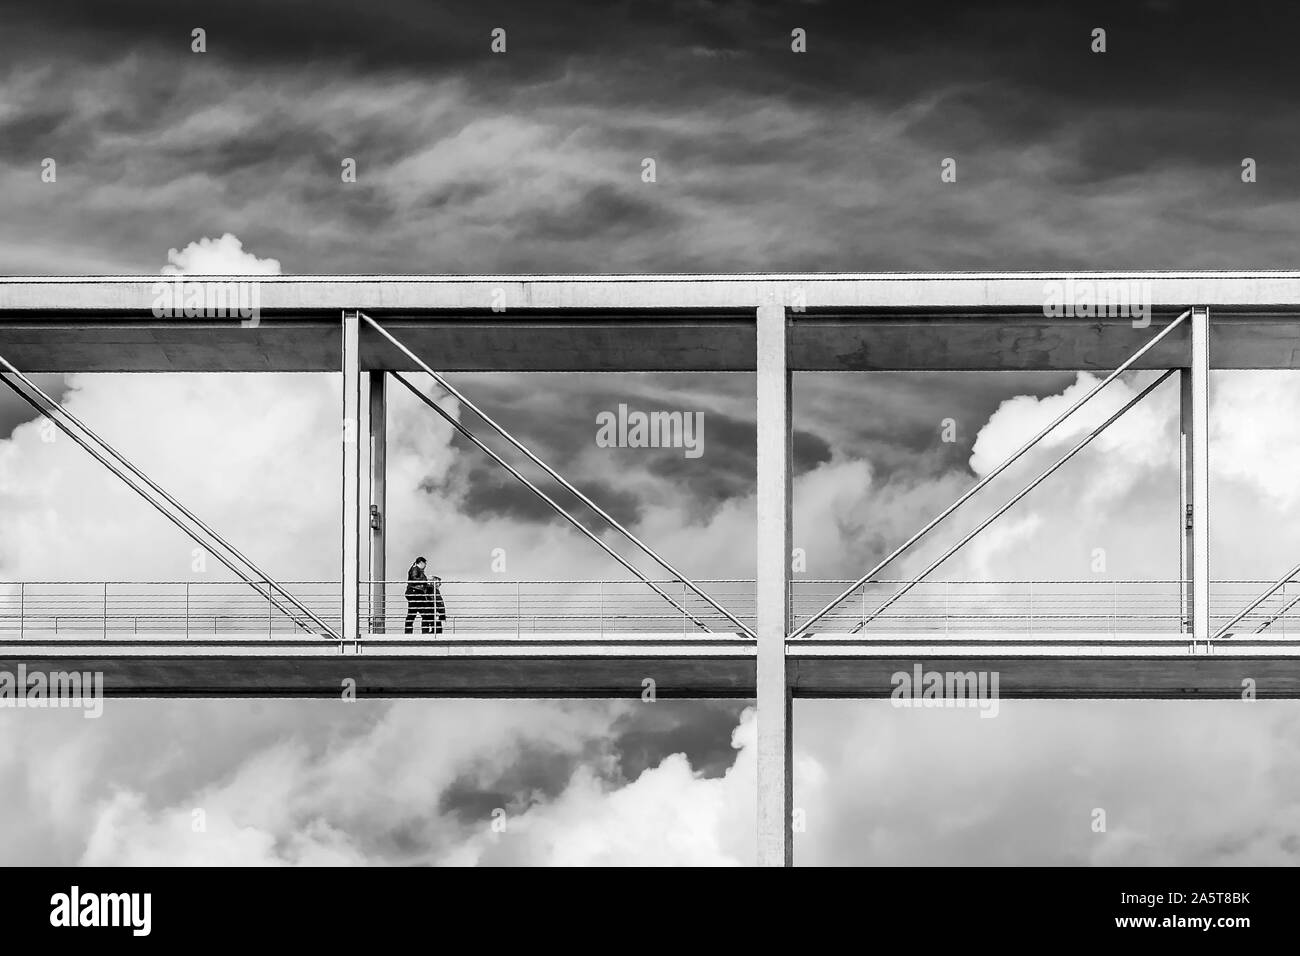 Beautiful black and white view of two people walking on a suspension bridge with a dramatic sky in the background, government district, Berlin, German Stock Photo